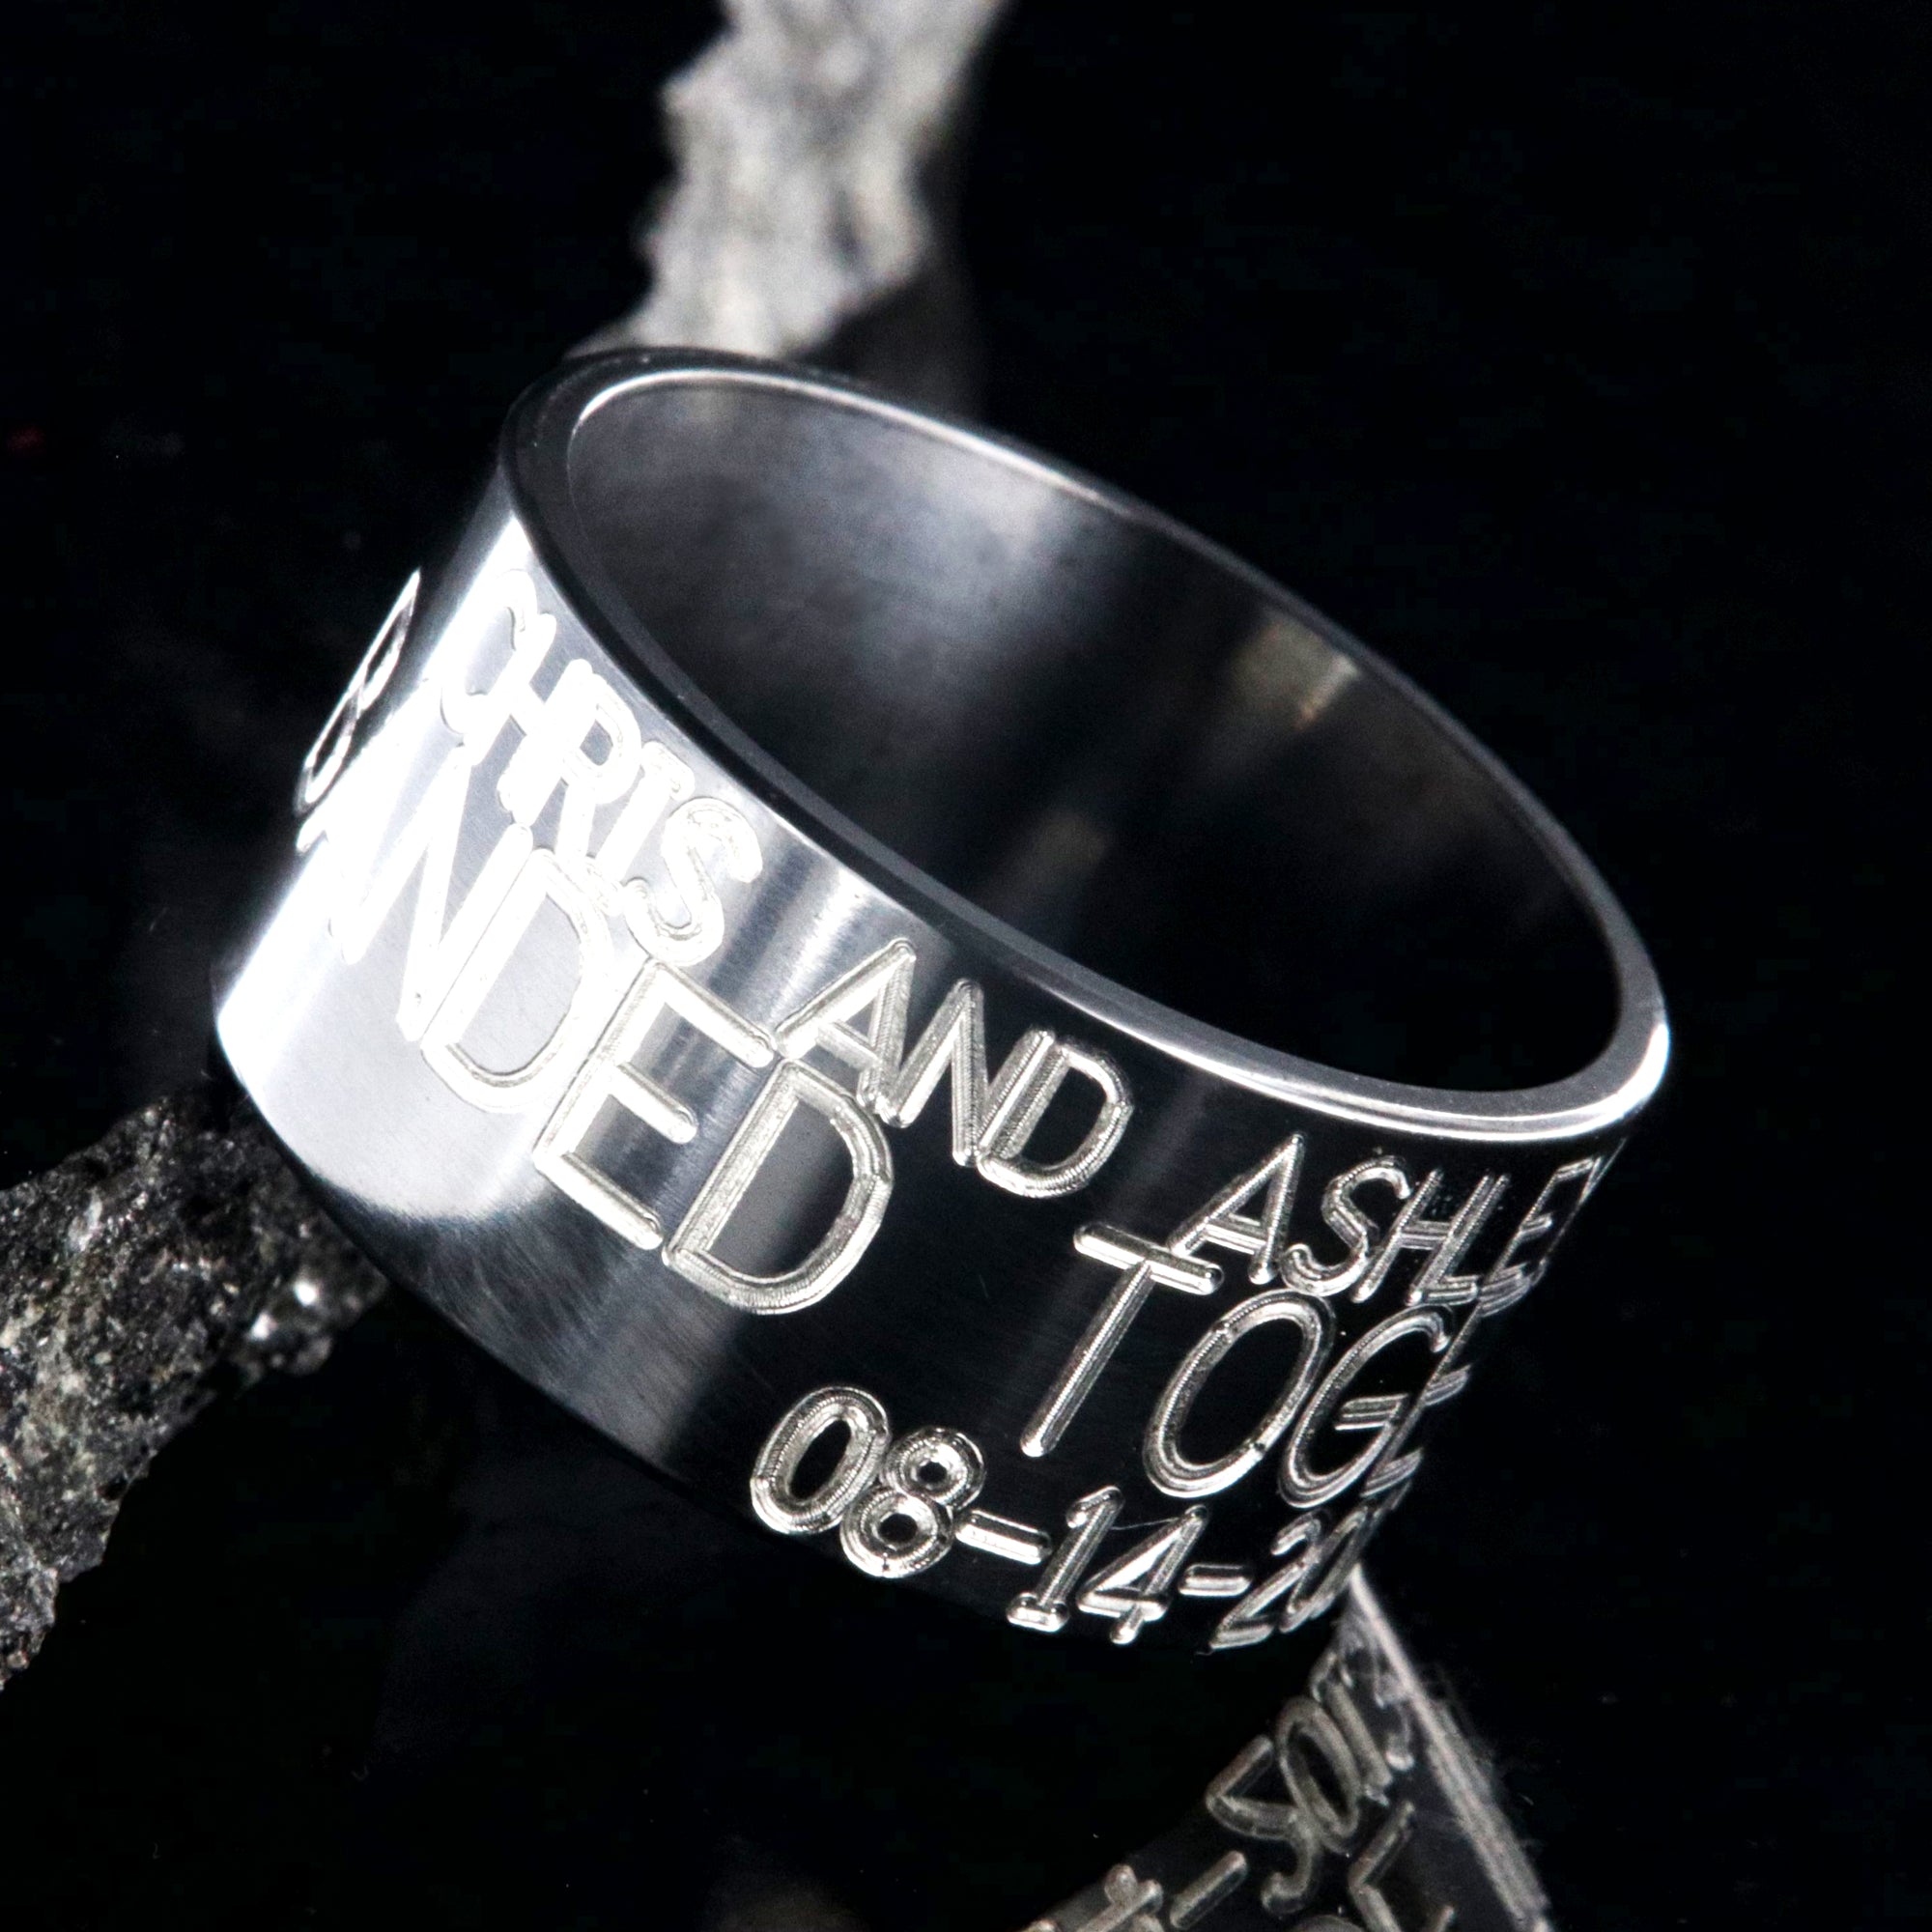 12mm wide black zirconium duck band ring; polished black appearance with 3 lines of two-toned personalized text